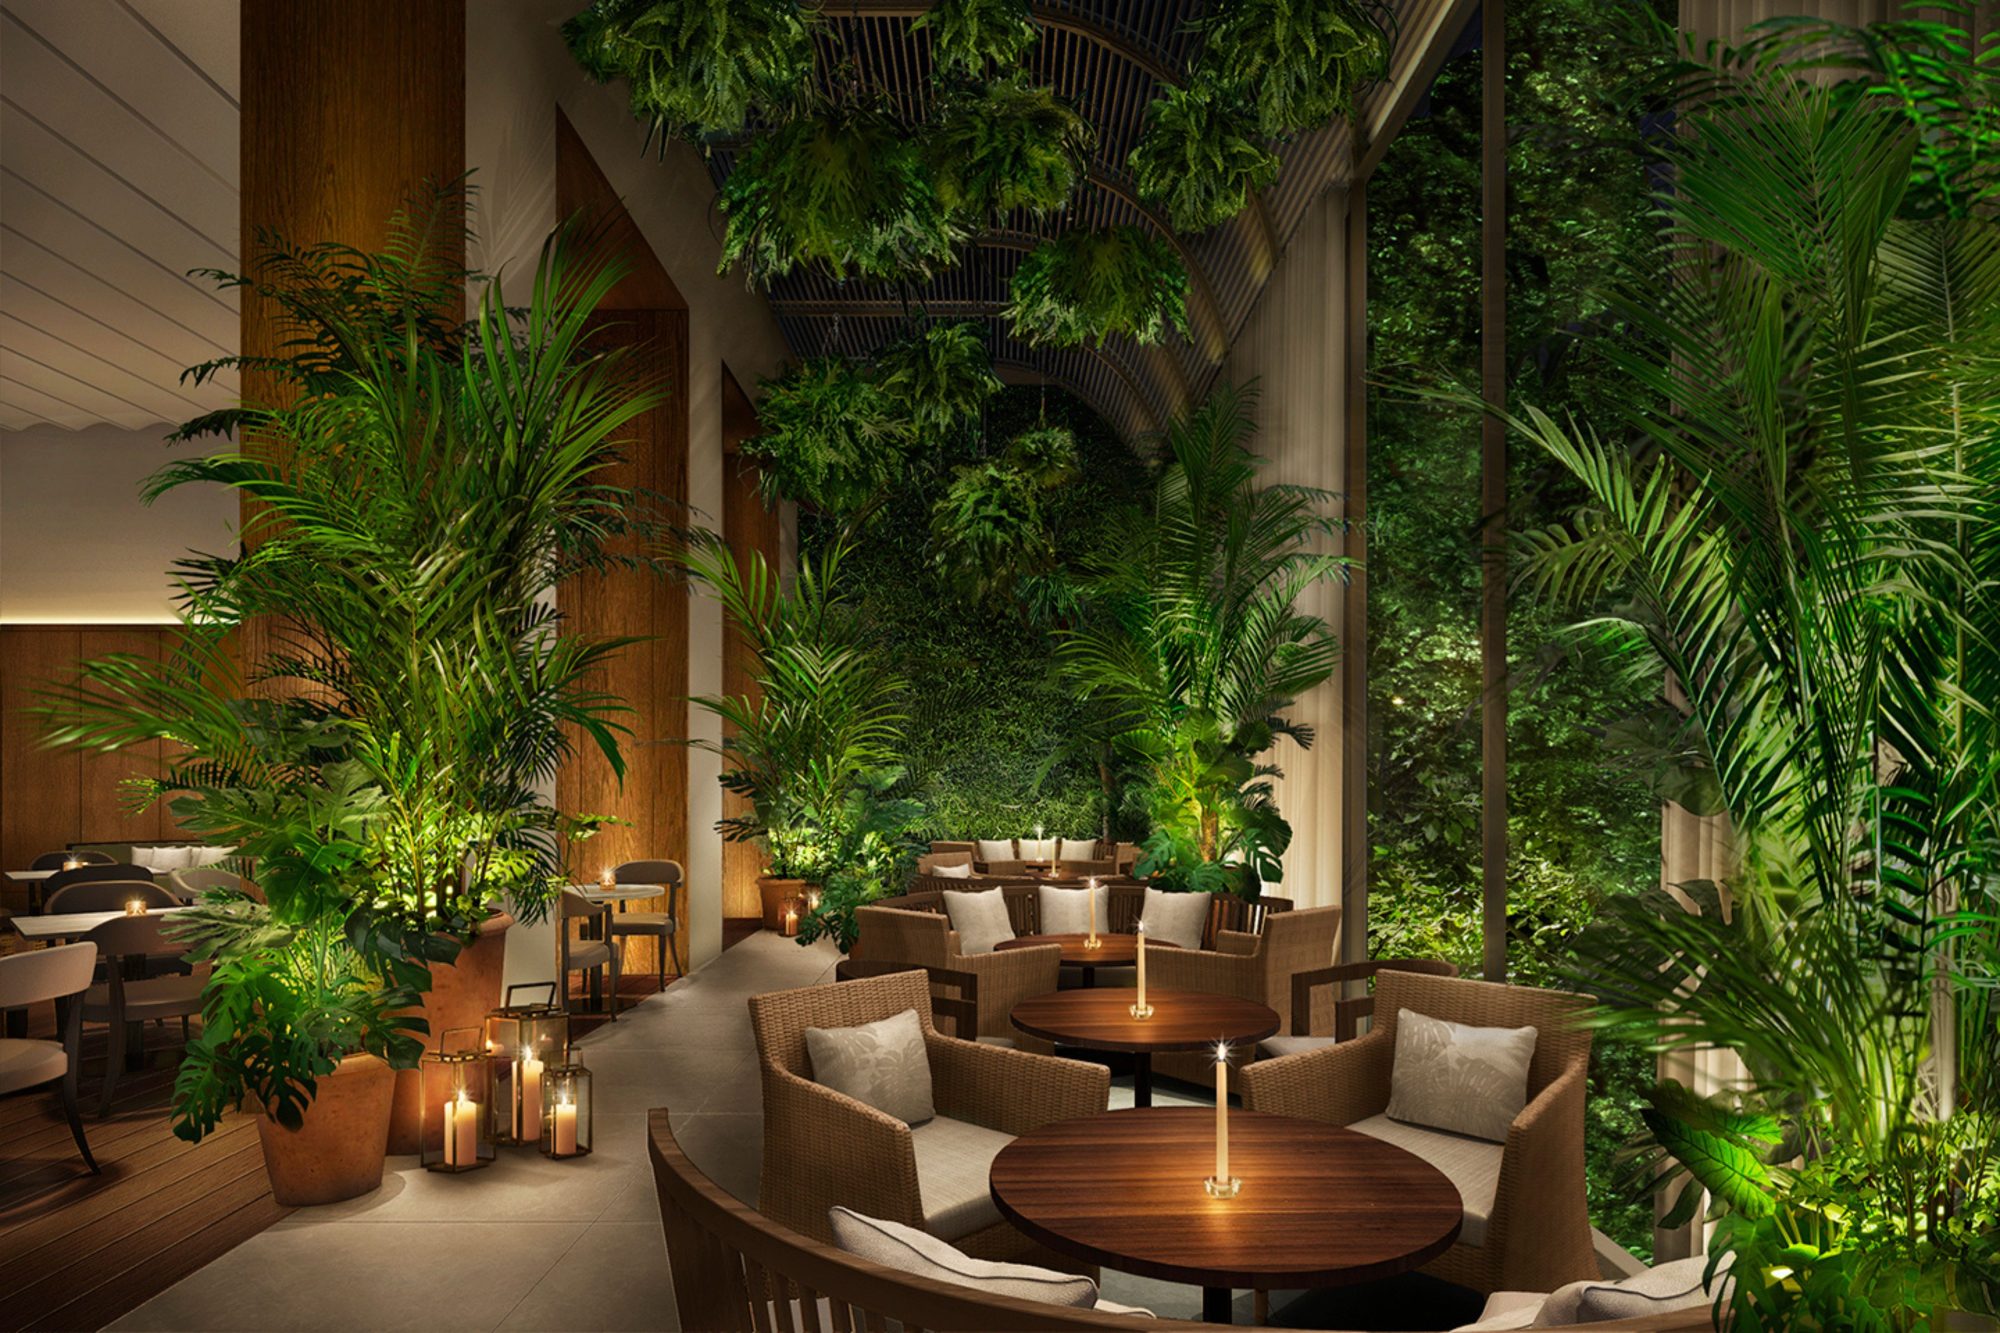 Singapore Edition welcomes guests to a serene sanctuary